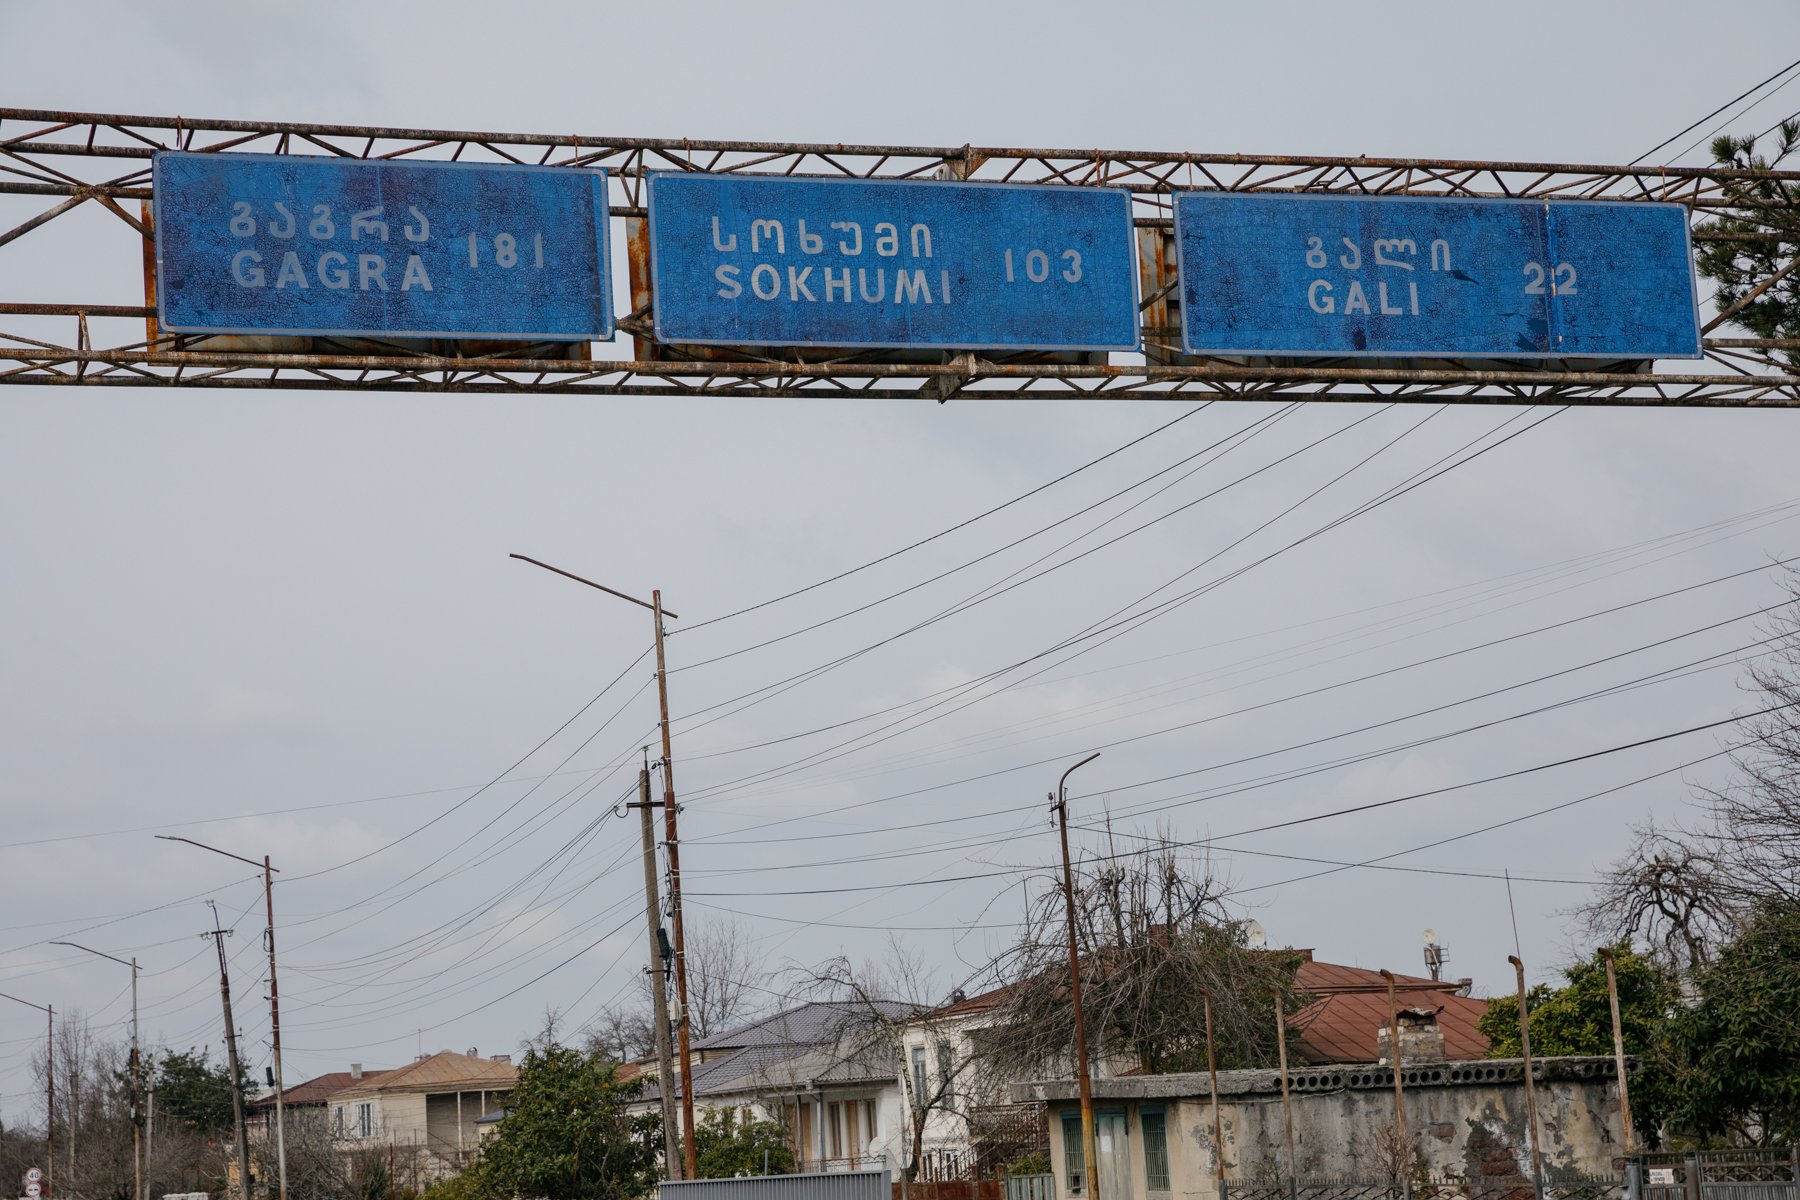  All three destinations on this road sign leading from Zugdidi to the Enguri Bridge are inaccessible for the vast majority of Georgians. 